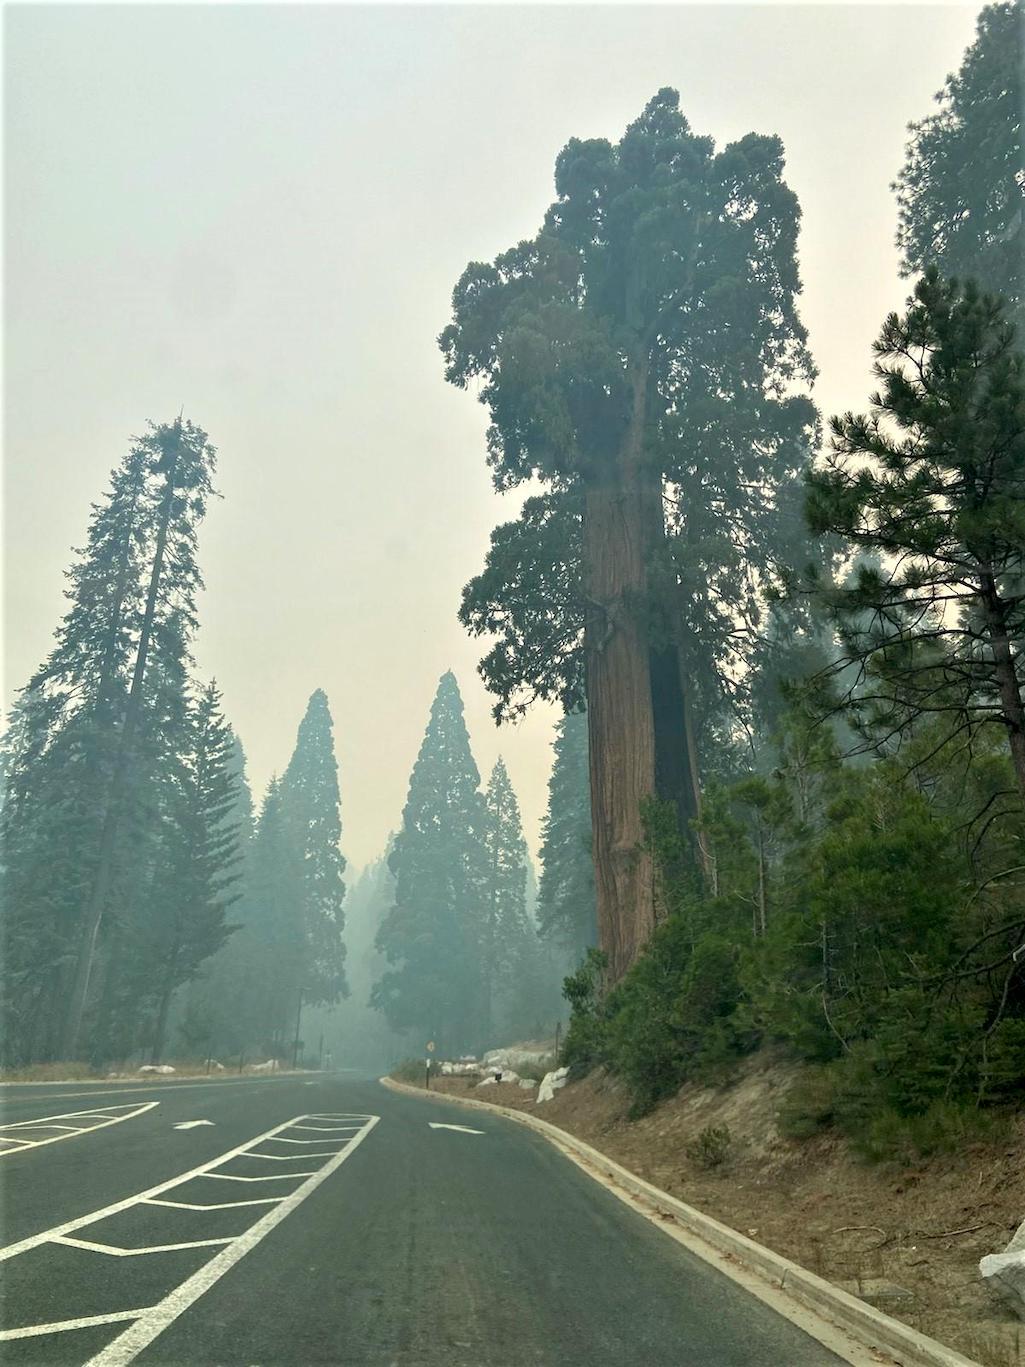 Much of Kings Canyon National Park has been closed by the KNP Complex of wildfire/NPS